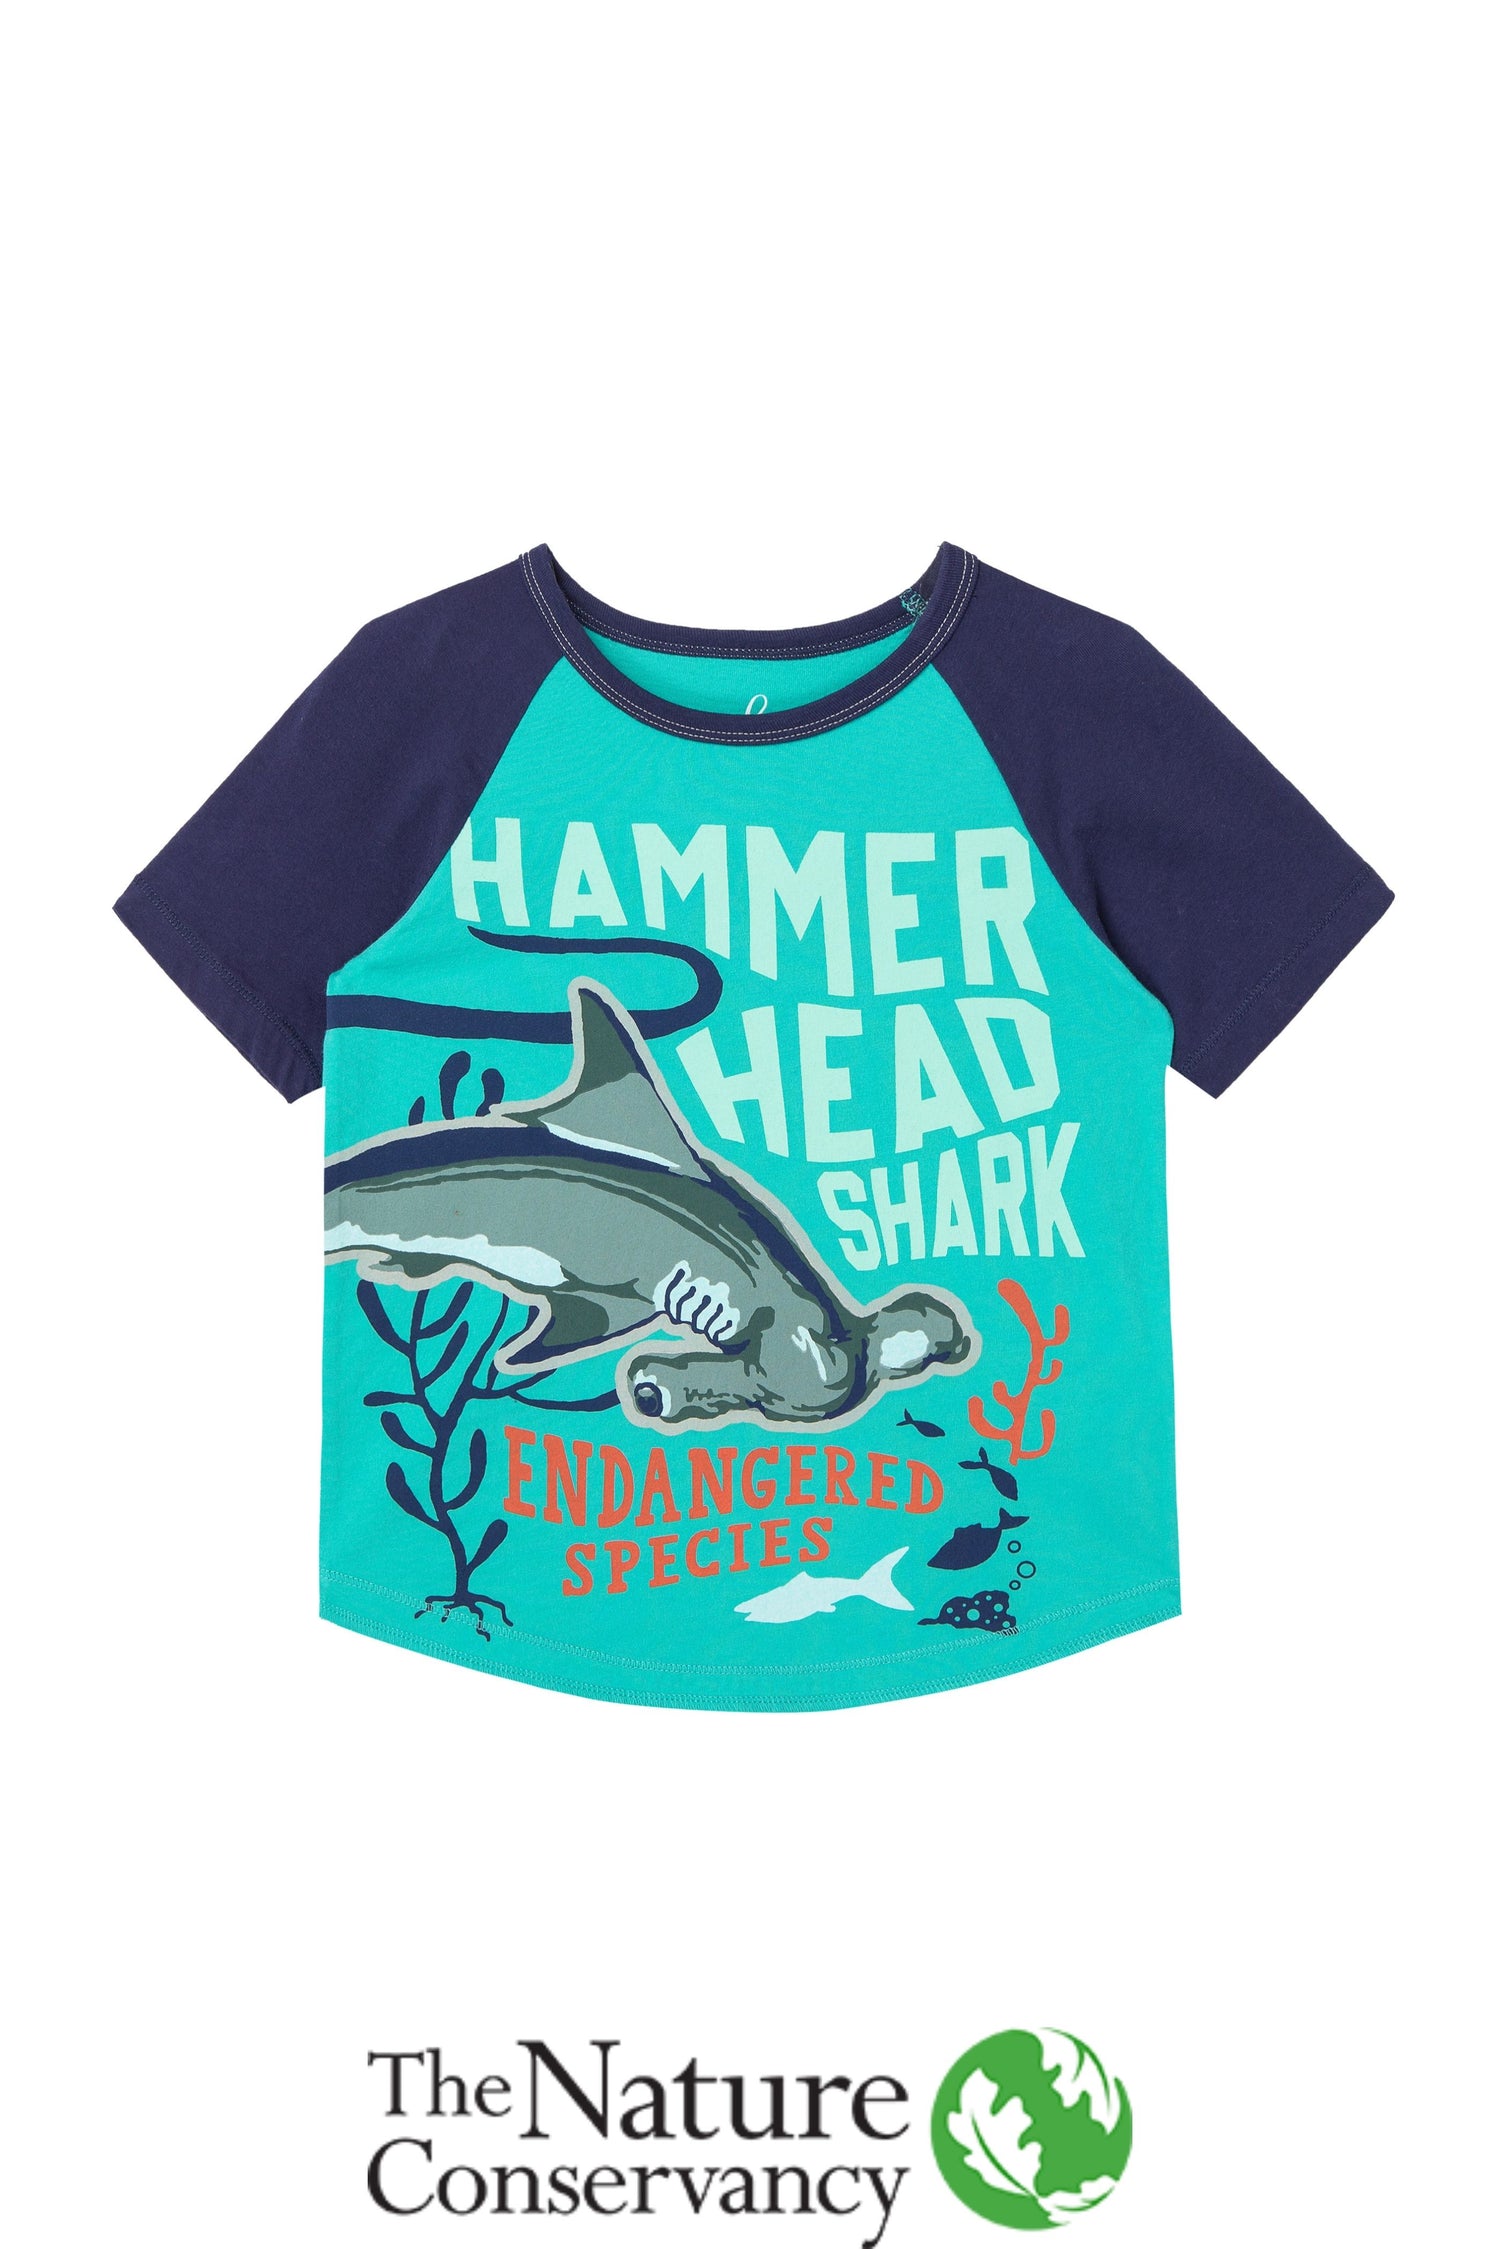 Front view of blue baseball tee style shirt with Hammerhead shark image and wording 